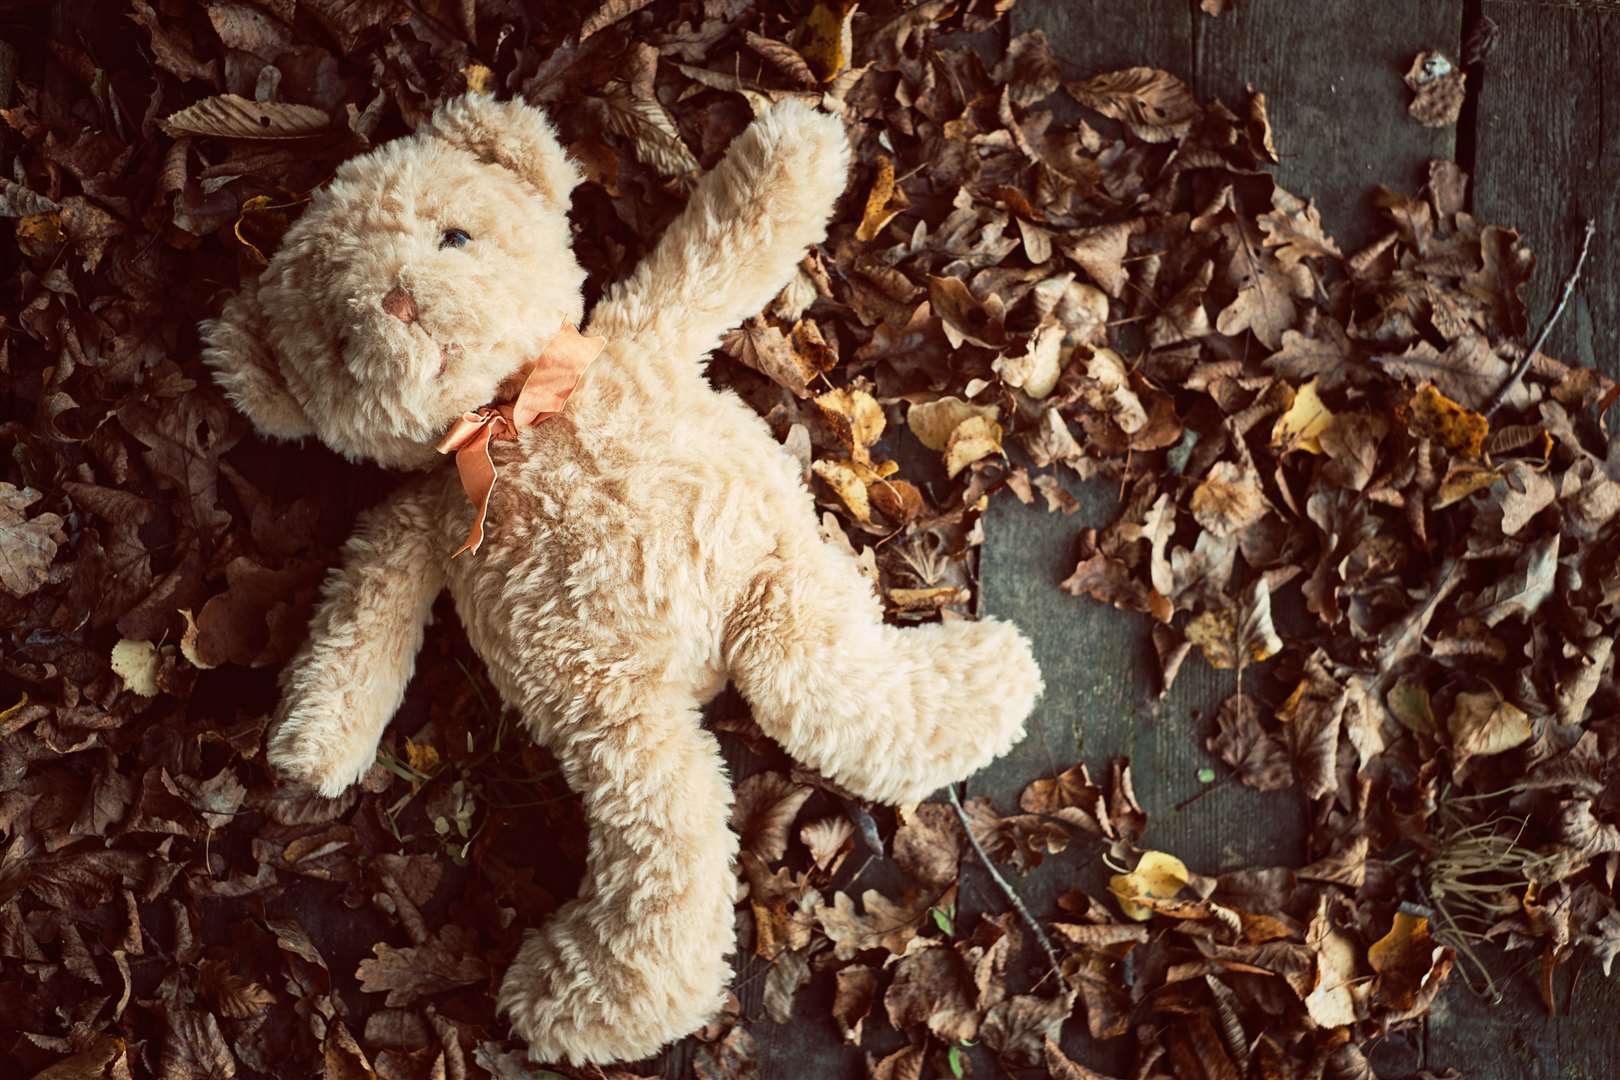 The most common items to lose are hats, jumpers and cuddly toys